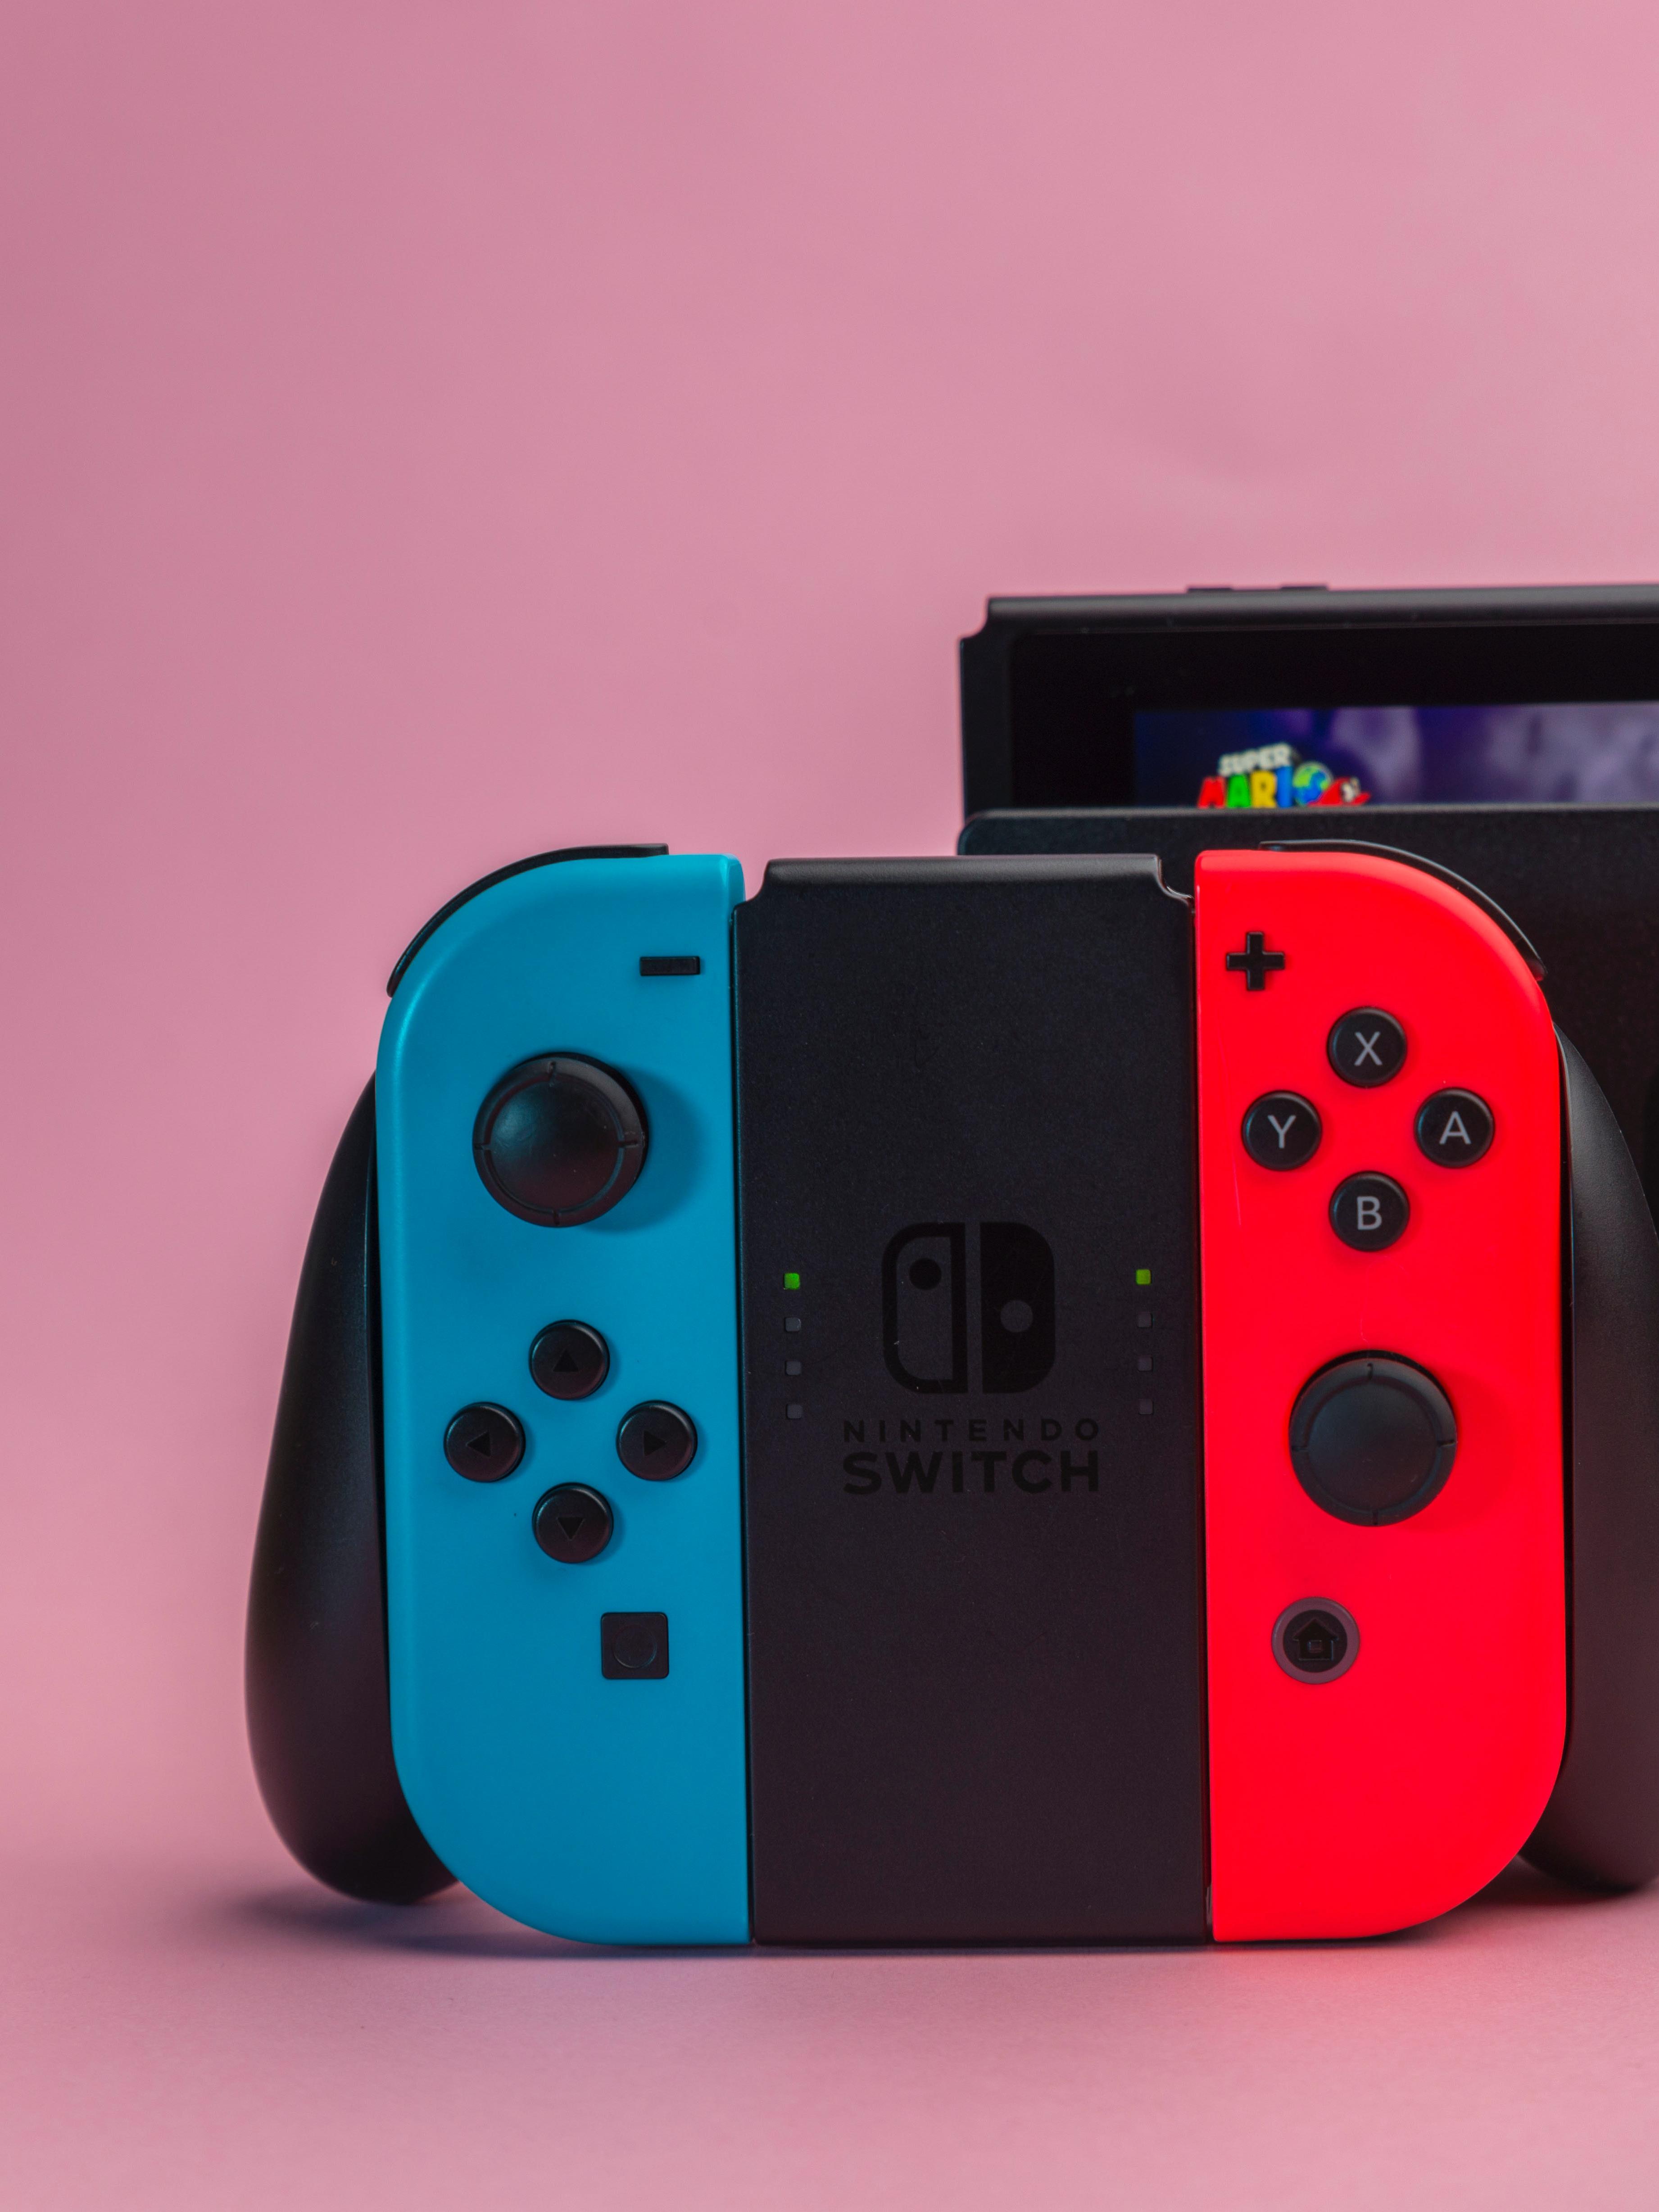 Nintendo Swtch console with Joy-Cons